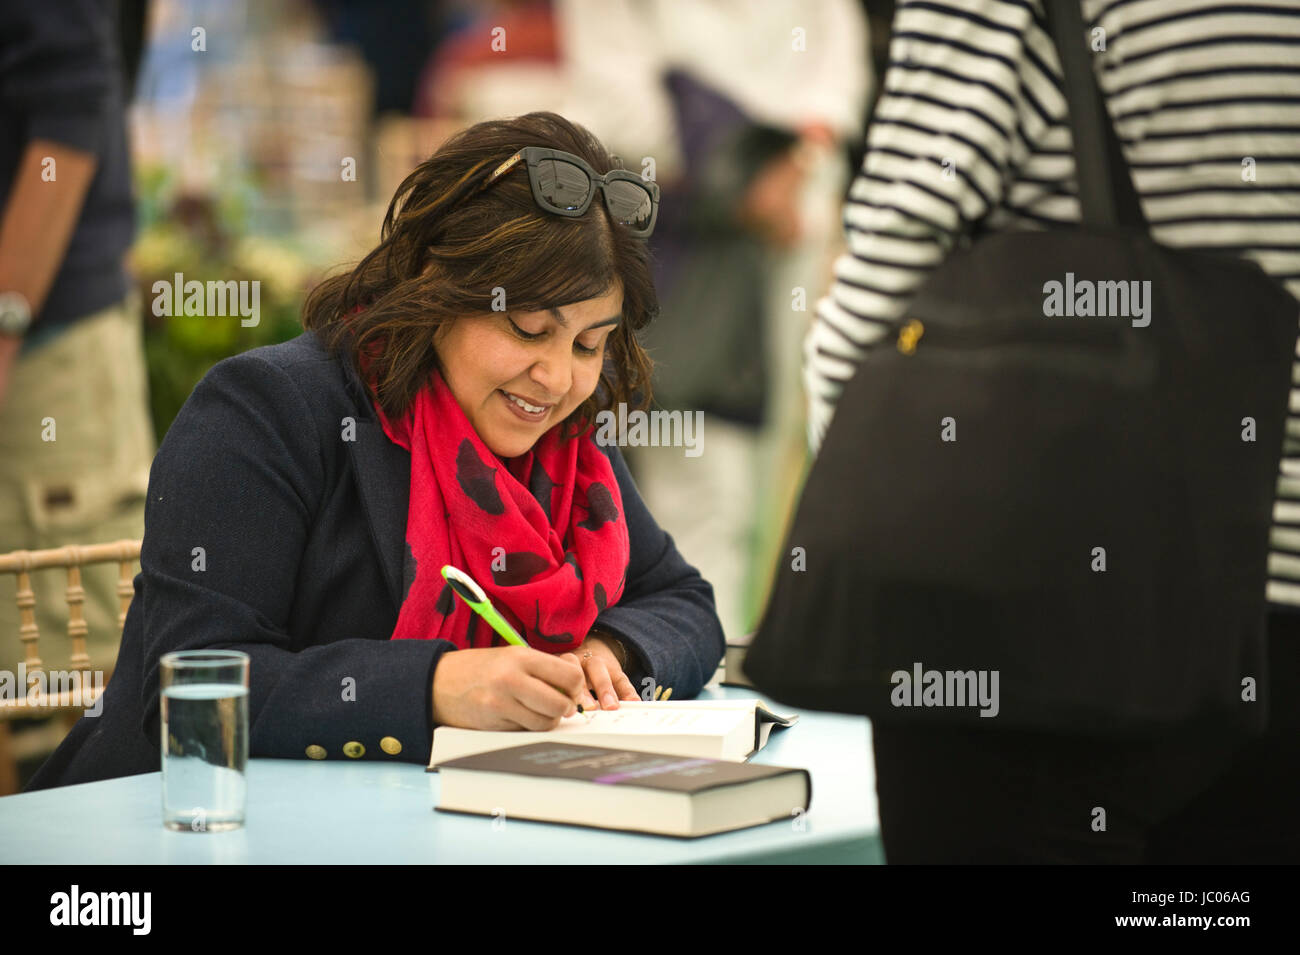 Sayeeda Warsi, Baroness Warsi lawyer & politician signing books for fans in the bookshop at the annual Hay Festival of Literature and the Arts 2017 Hay-on-Wye Powys Wales UK Stock Photo